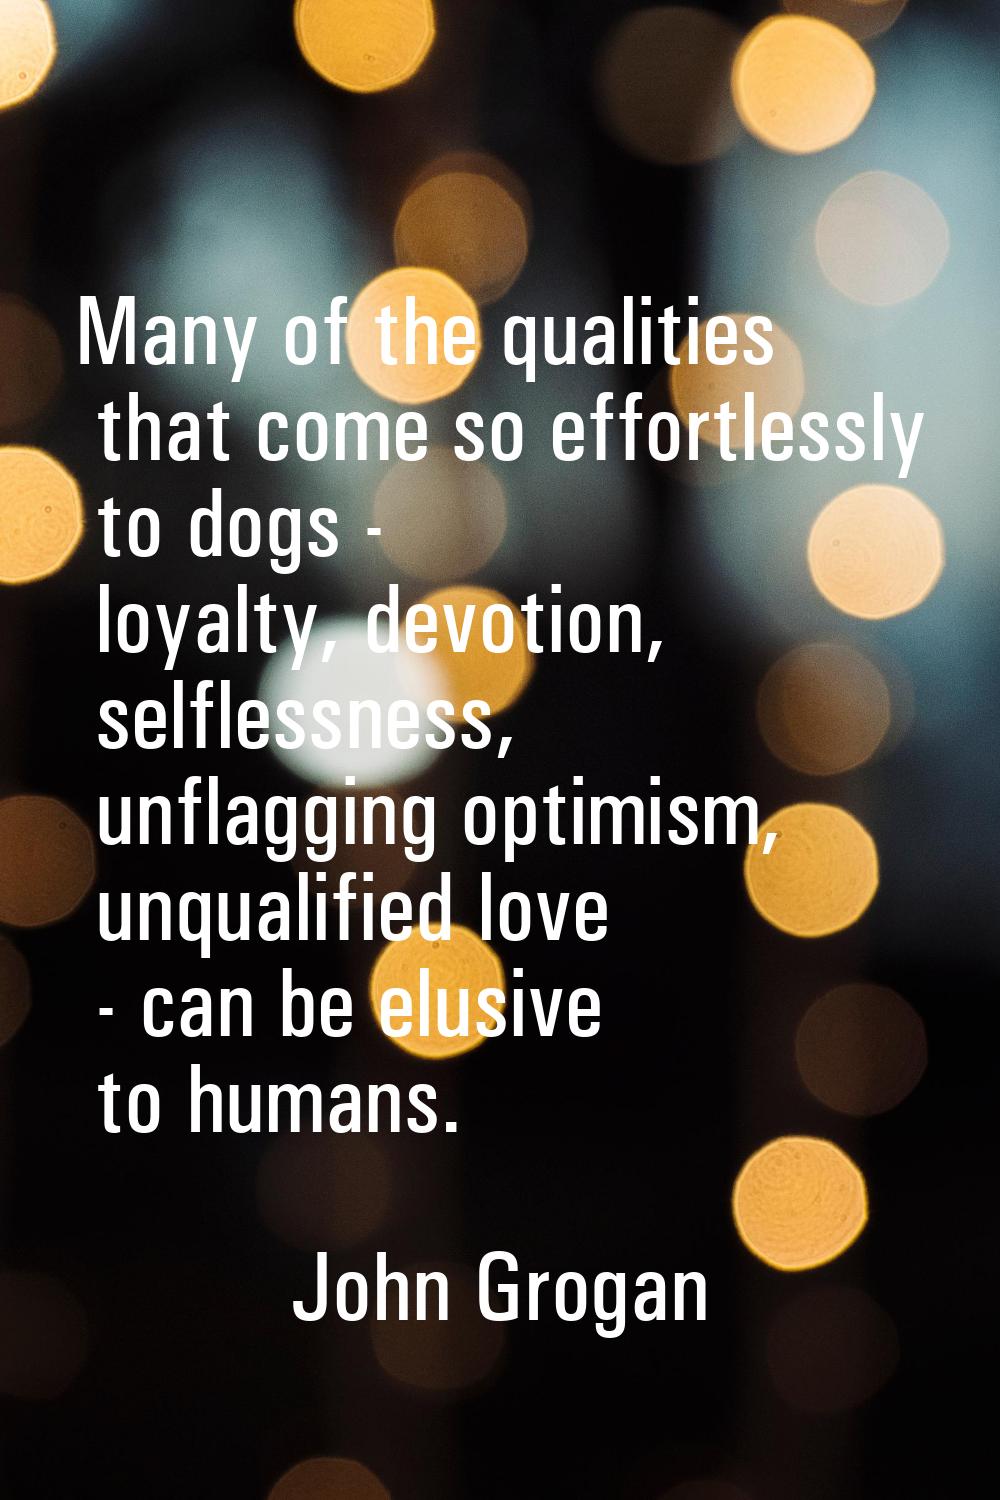 Many of the qualities that come so effortlessly to dogs - loyalty, devotion, selflessness, unflaggi